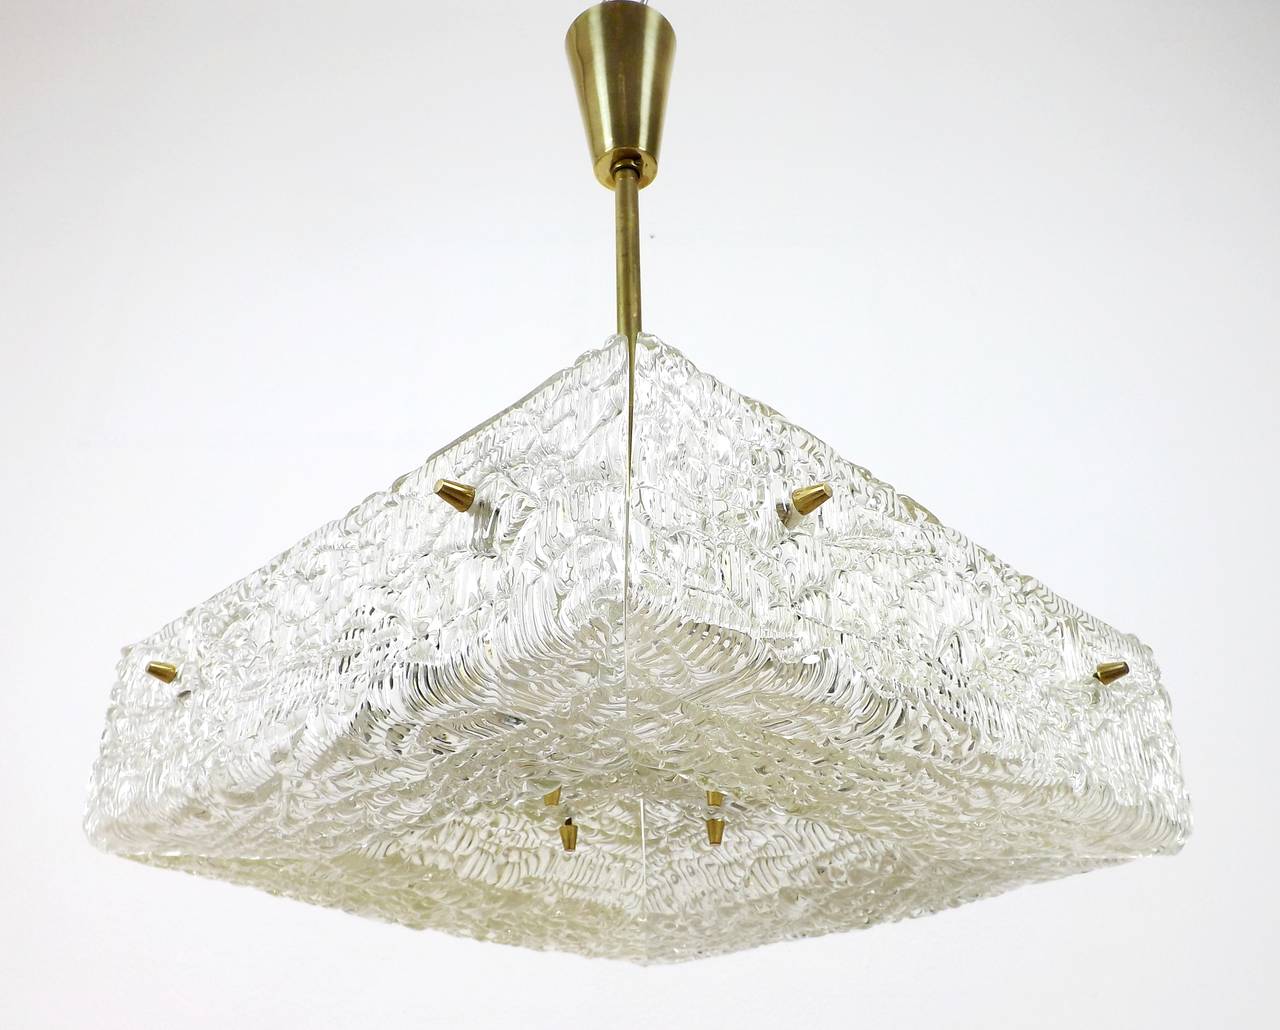 A textured glass and brass light fixture by J.T. Kalmar, Austria, manufactured in midcentury, circa 1960 (late 1950s or early 1960s).
A square pressed glass with a watery structure is divided into four parts which are mounted with cone shaped brass